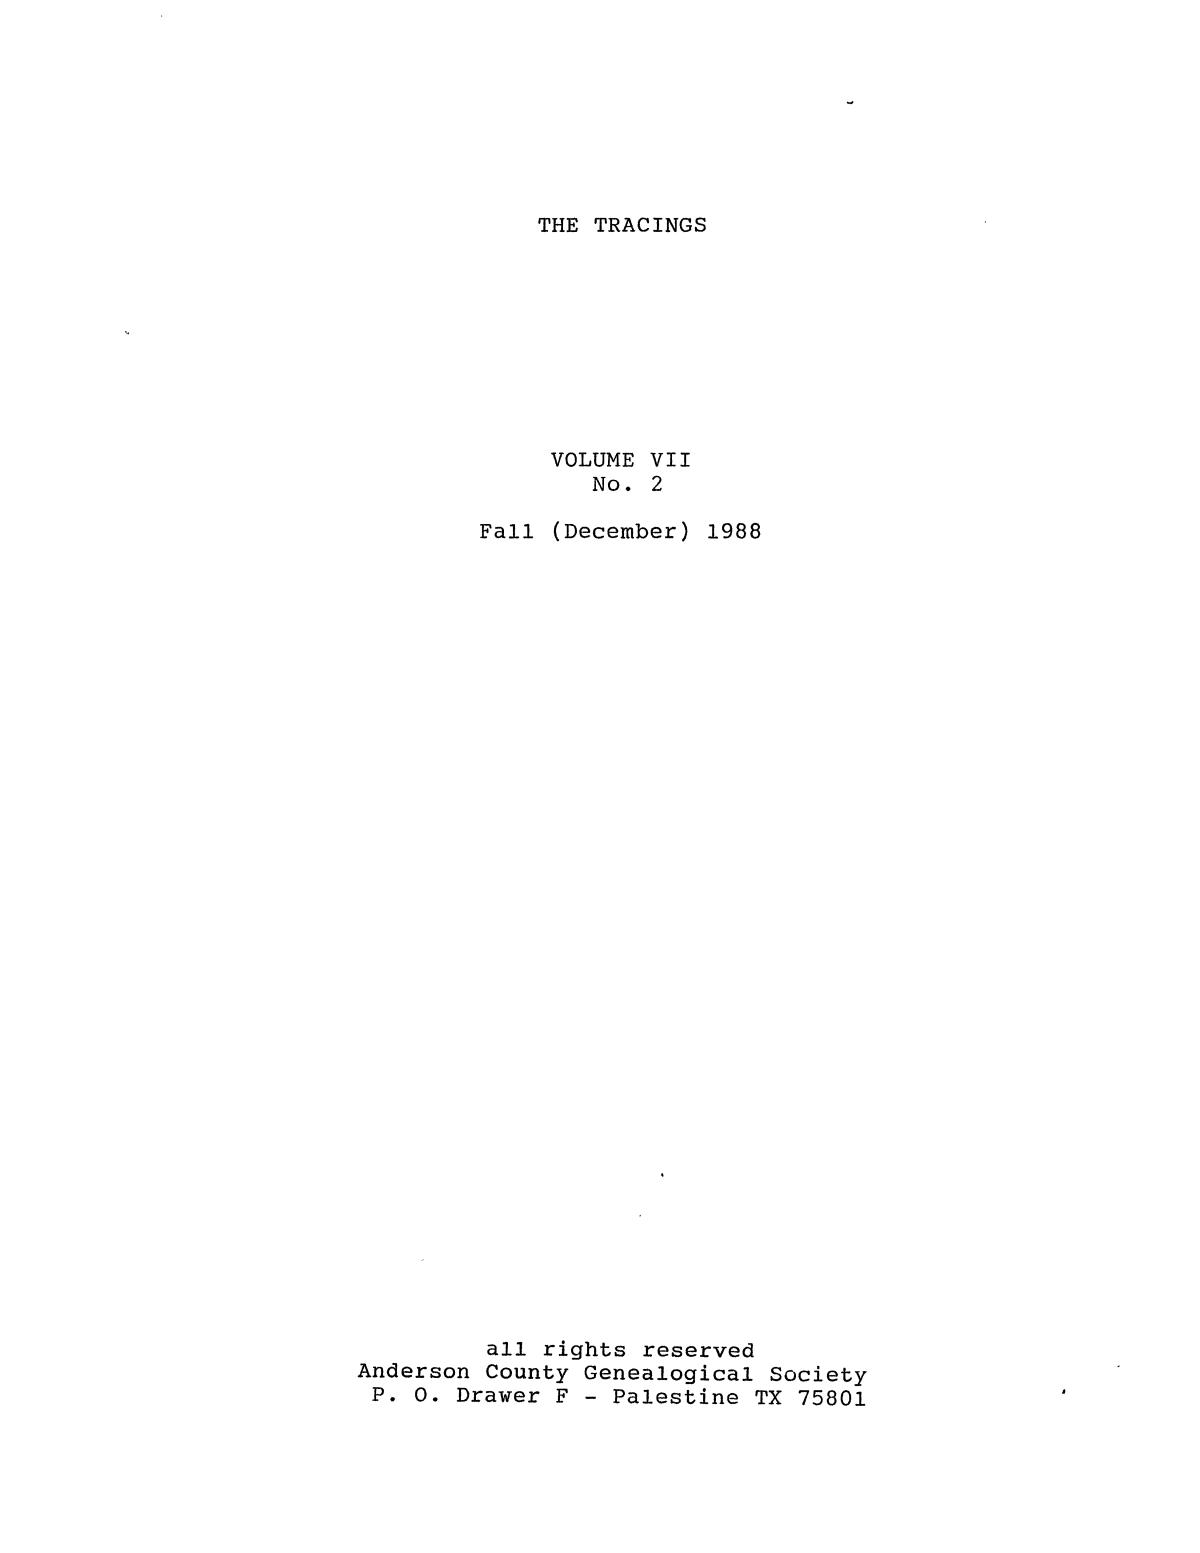 The Tracings, Volume 7, Number 2, Fall 1988
                                                
                                                    None
                                                